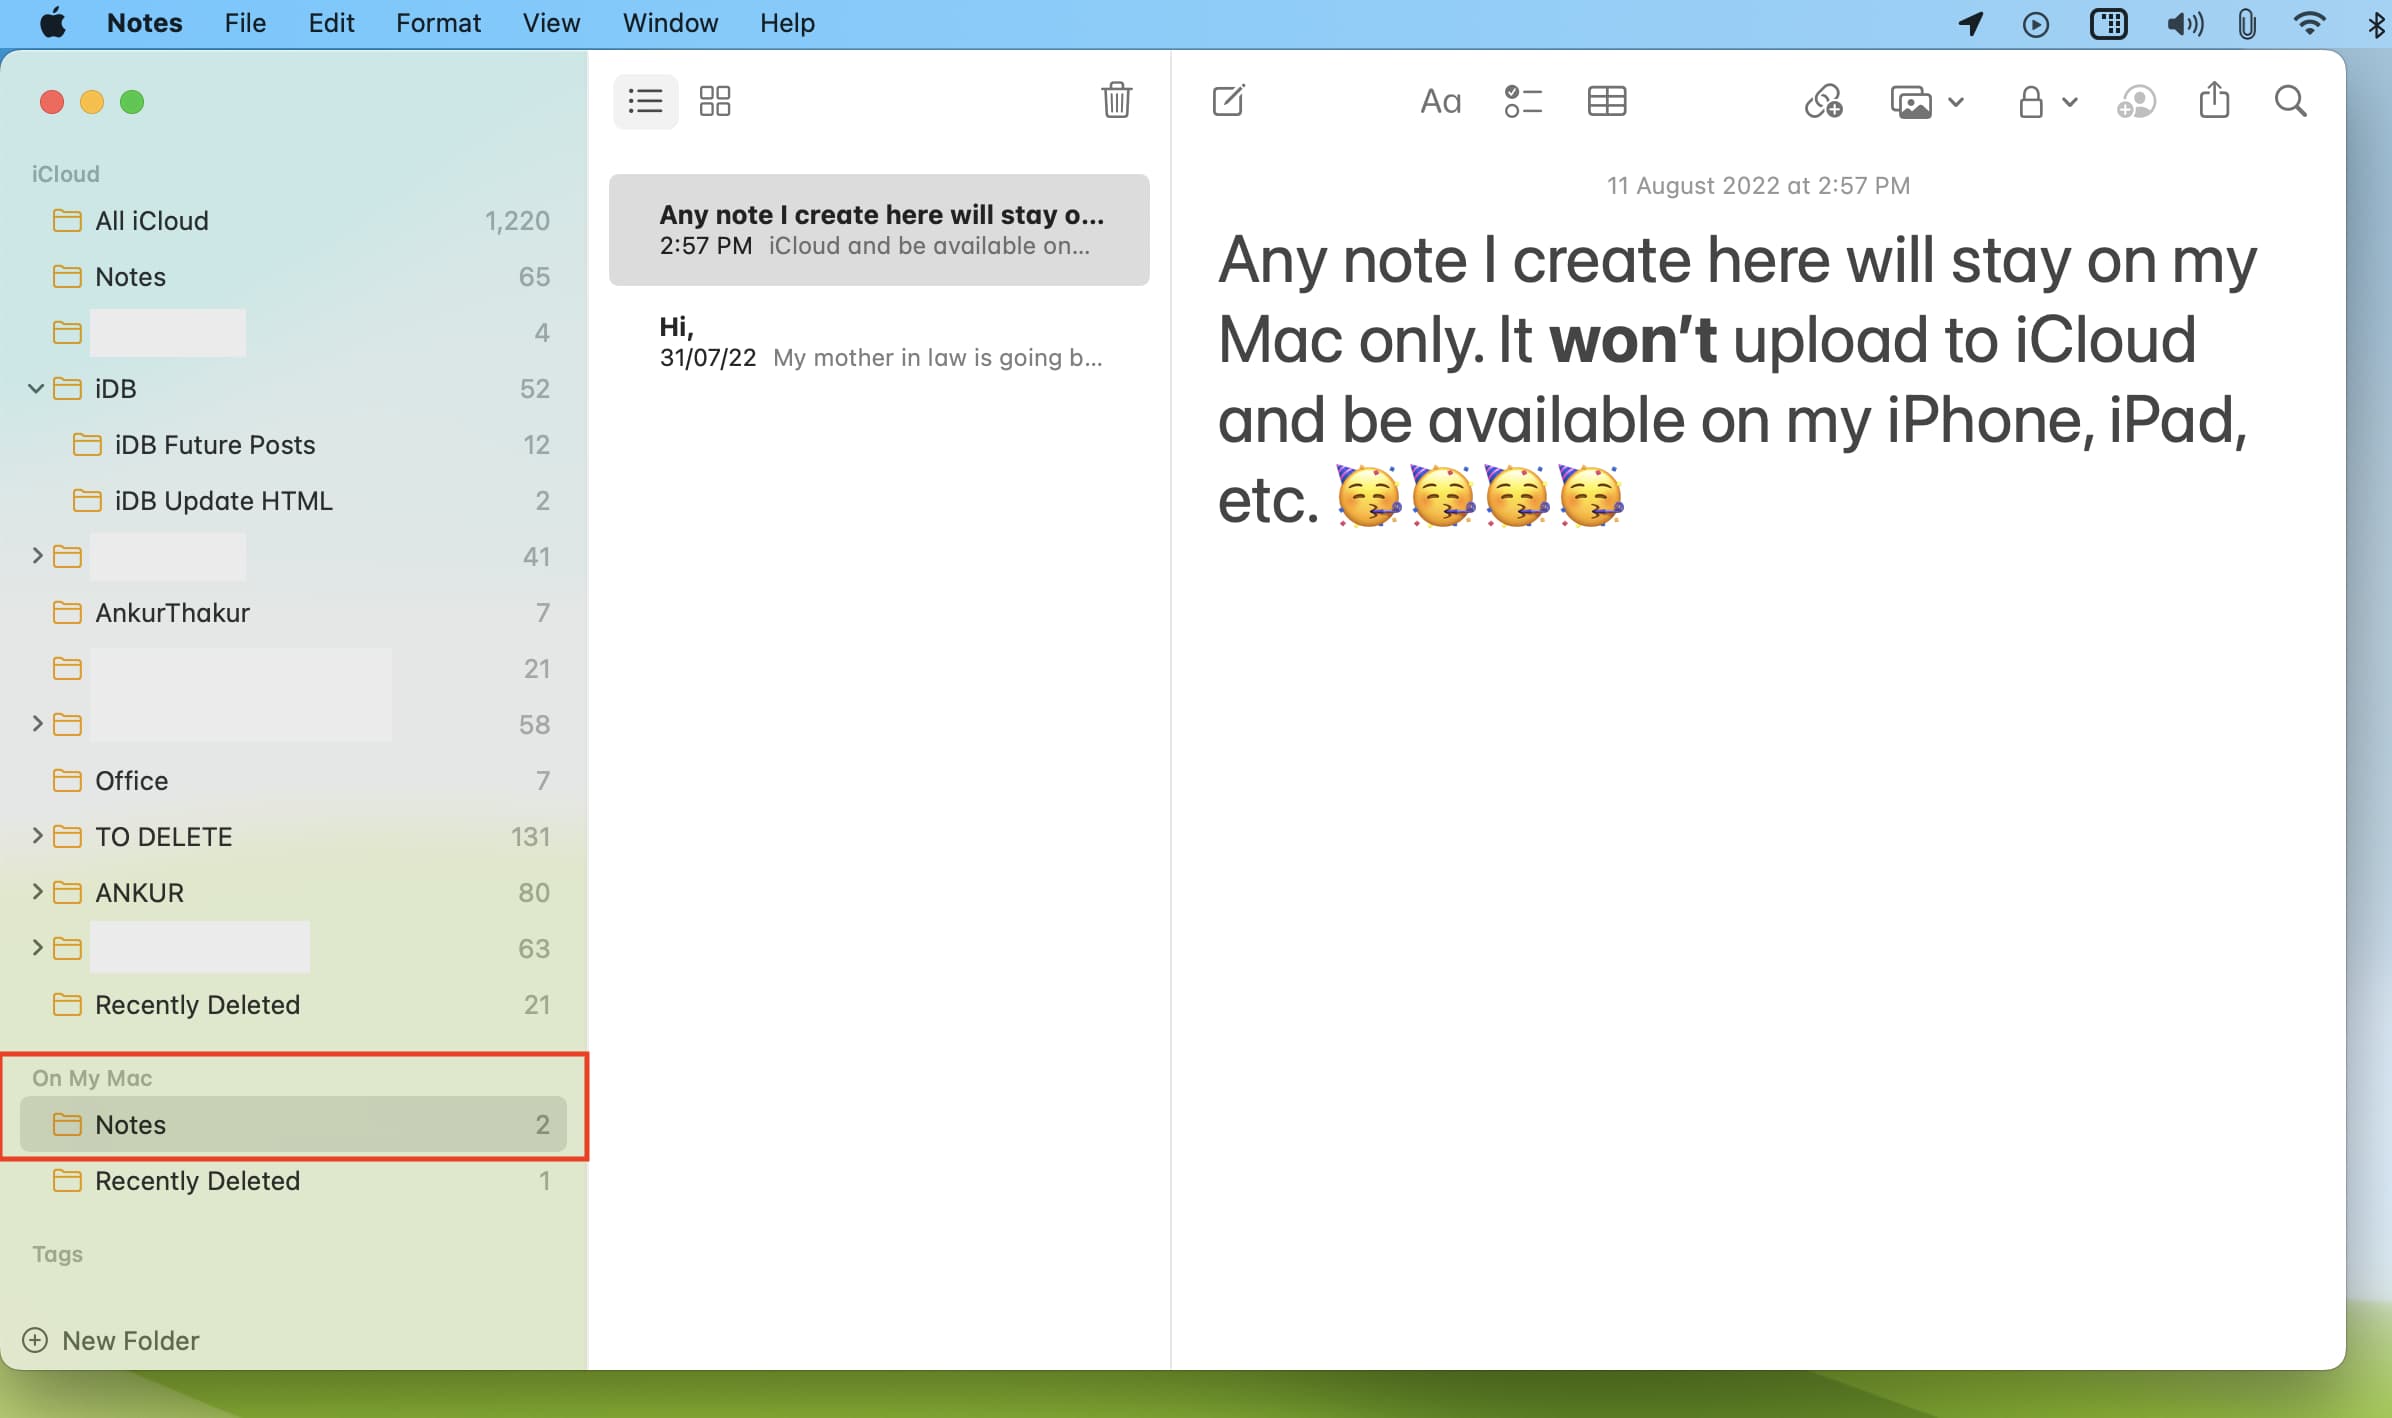 Create offline notes on Mac that don't upload to iCloud